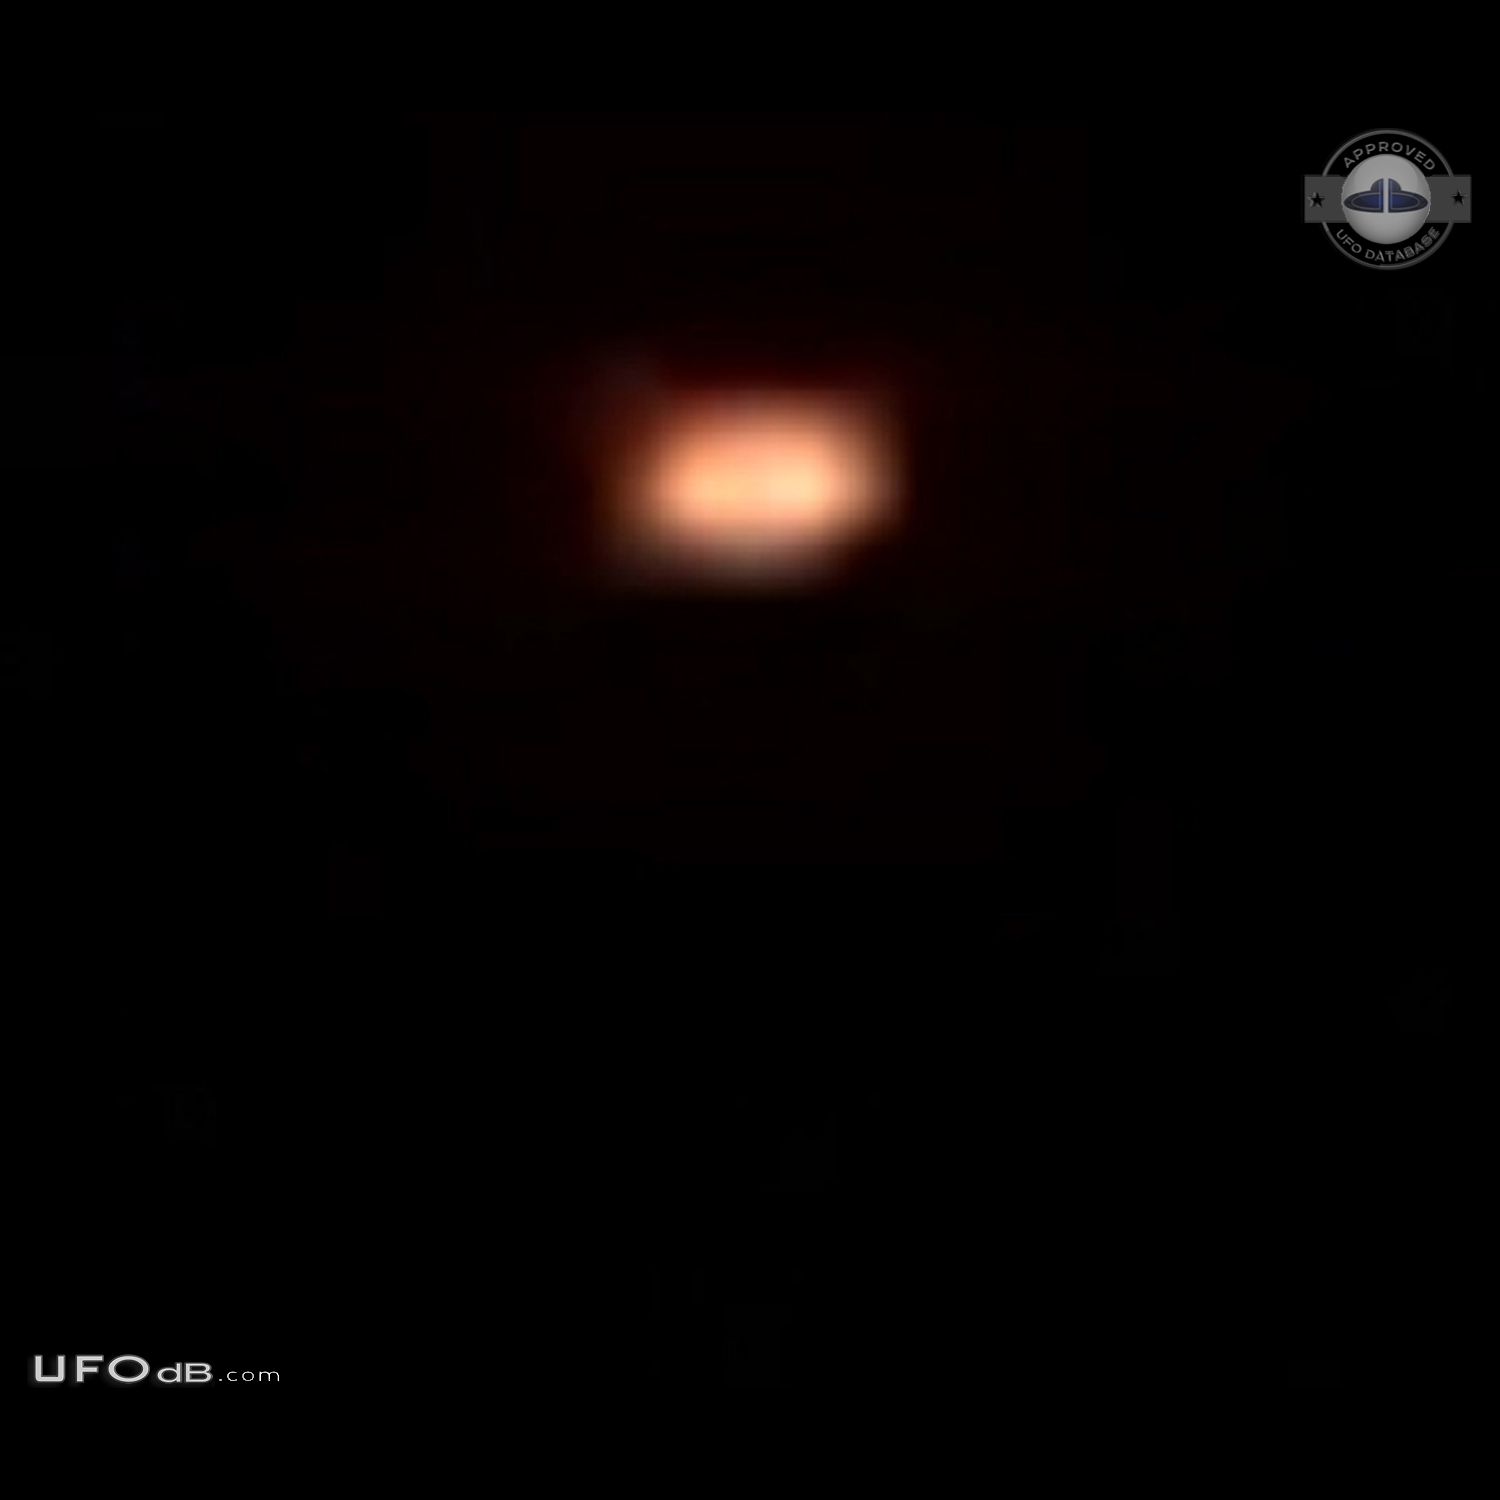 Glowing amber colored moving UFO - Kolkata, West Bengal India 2014 UFO Picture #691-2